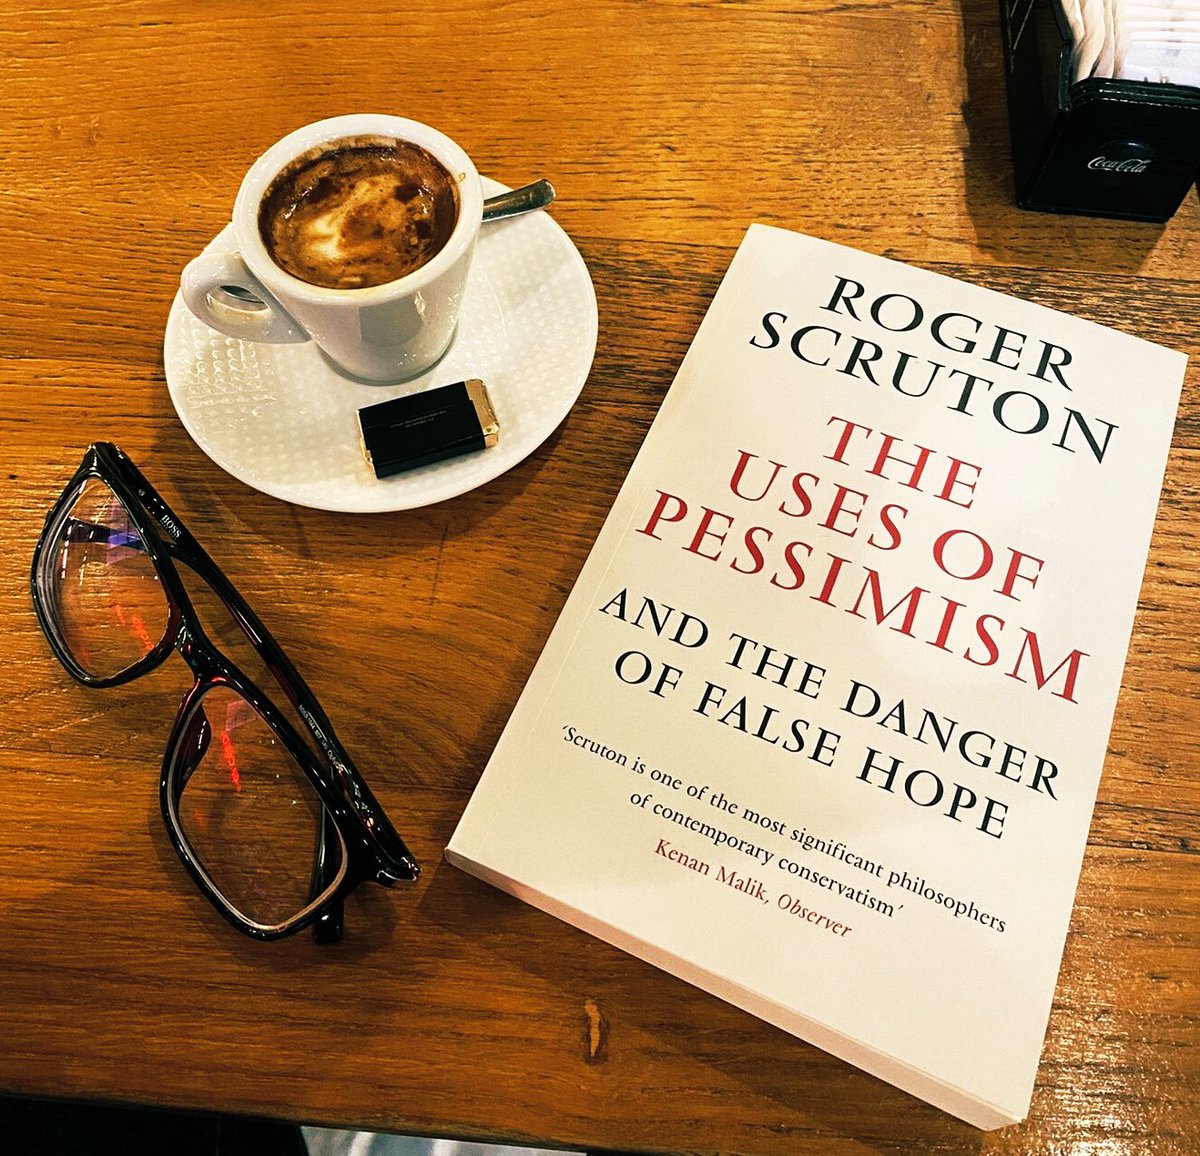 My very typical day after work; espresso and reading political philosophy. 

#PoliticalPhilosophy #RogerScruton